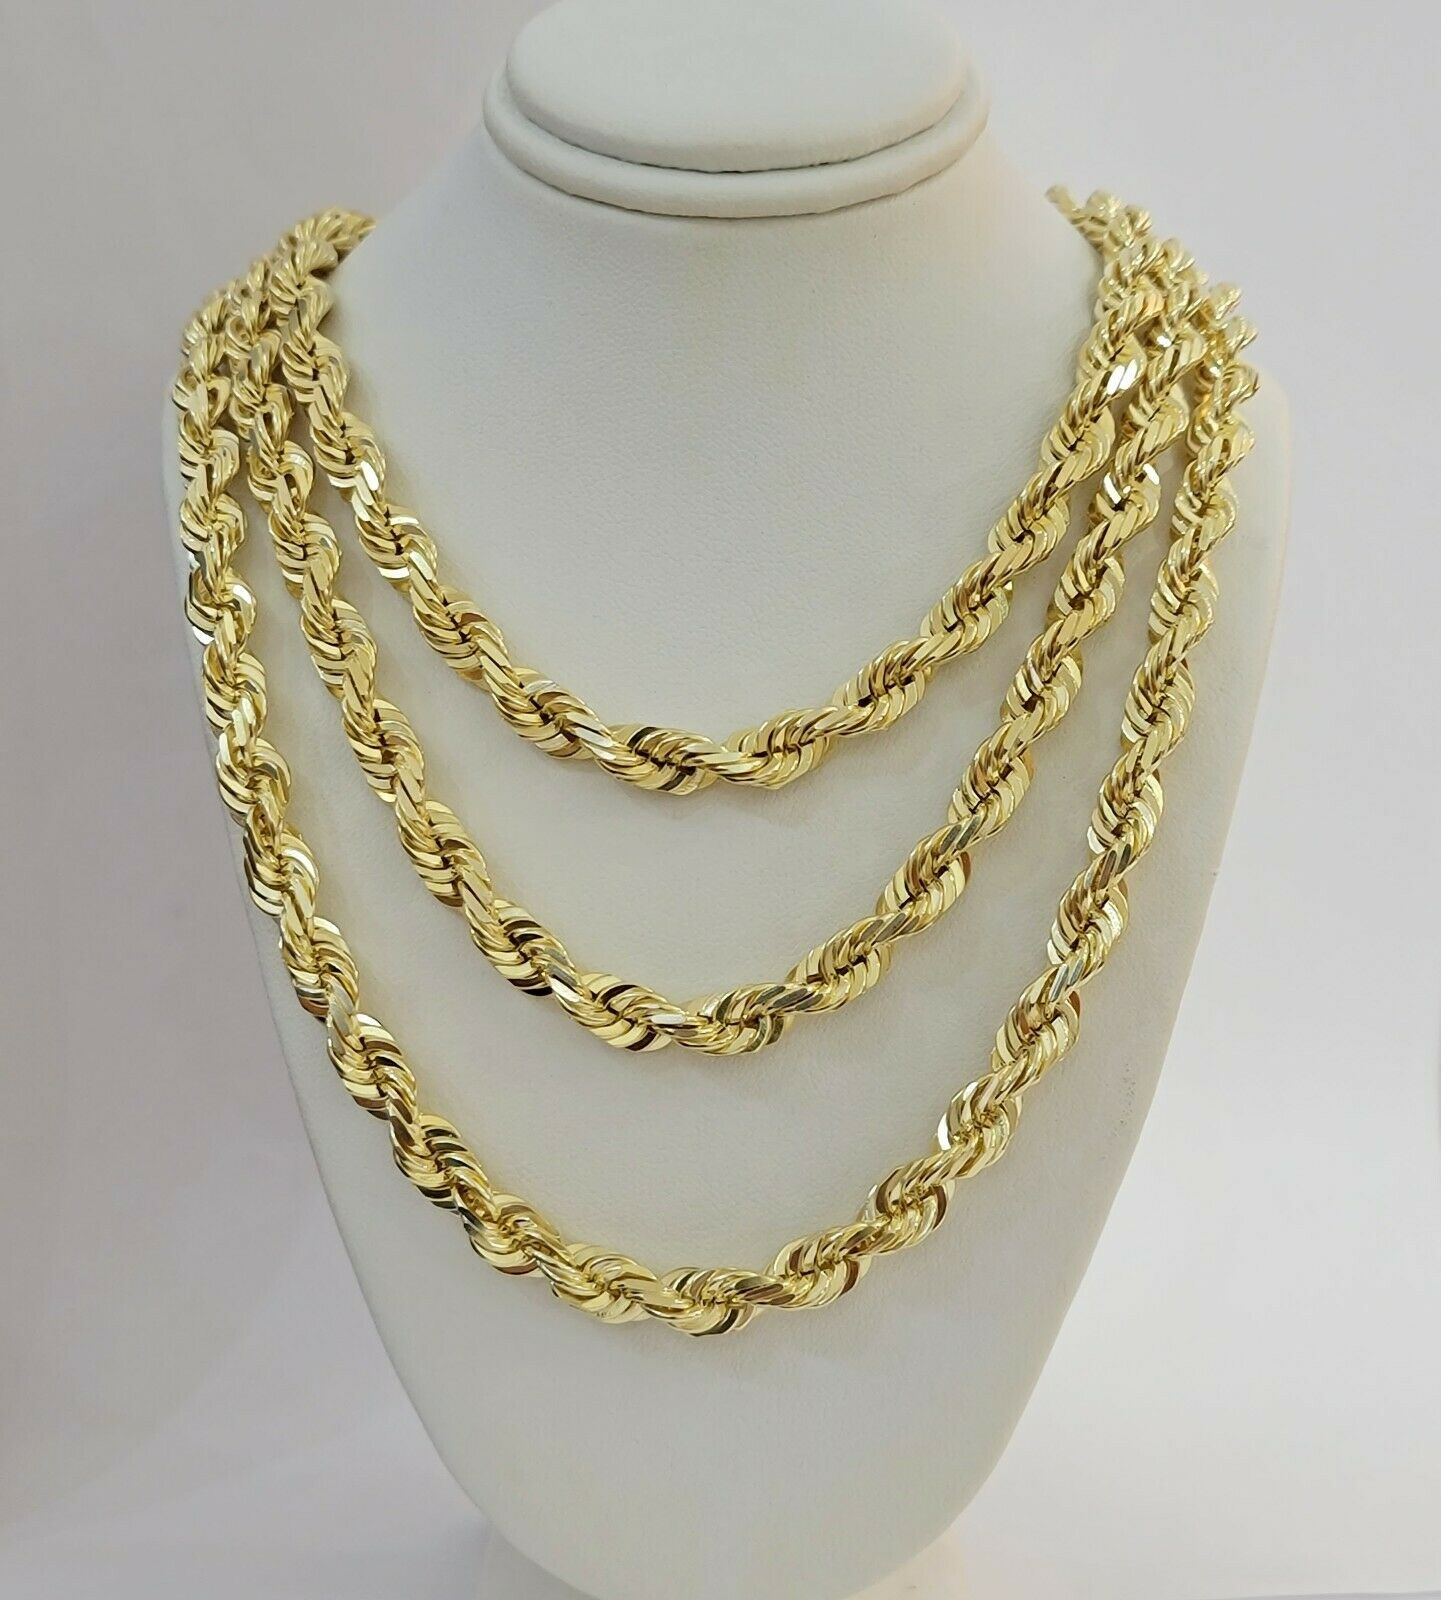 Solid Gold 10K Rope Chain 8mm 18-30 inch 10kt Yellow Gold Necklace Diamond Cut 22 inch